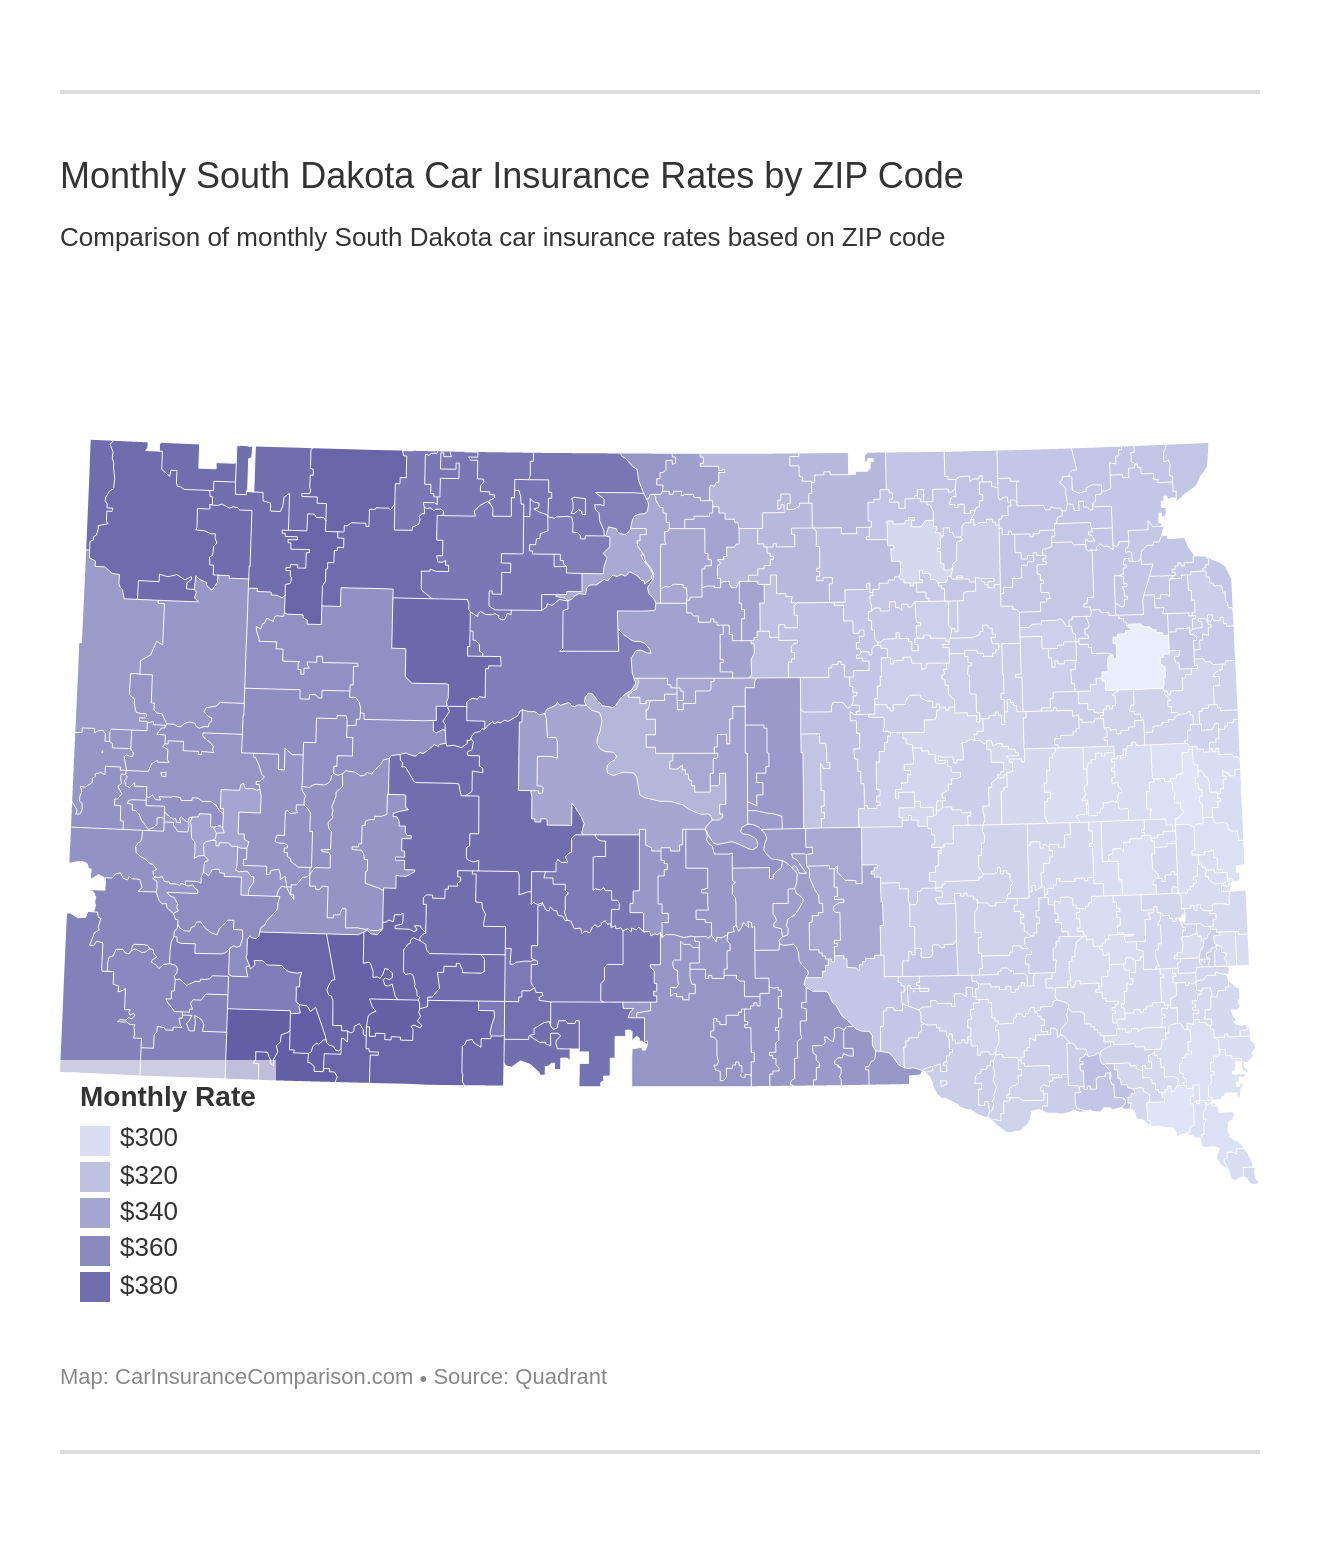 Monthly South Dakota Car Insurance Rates by ZIP Code